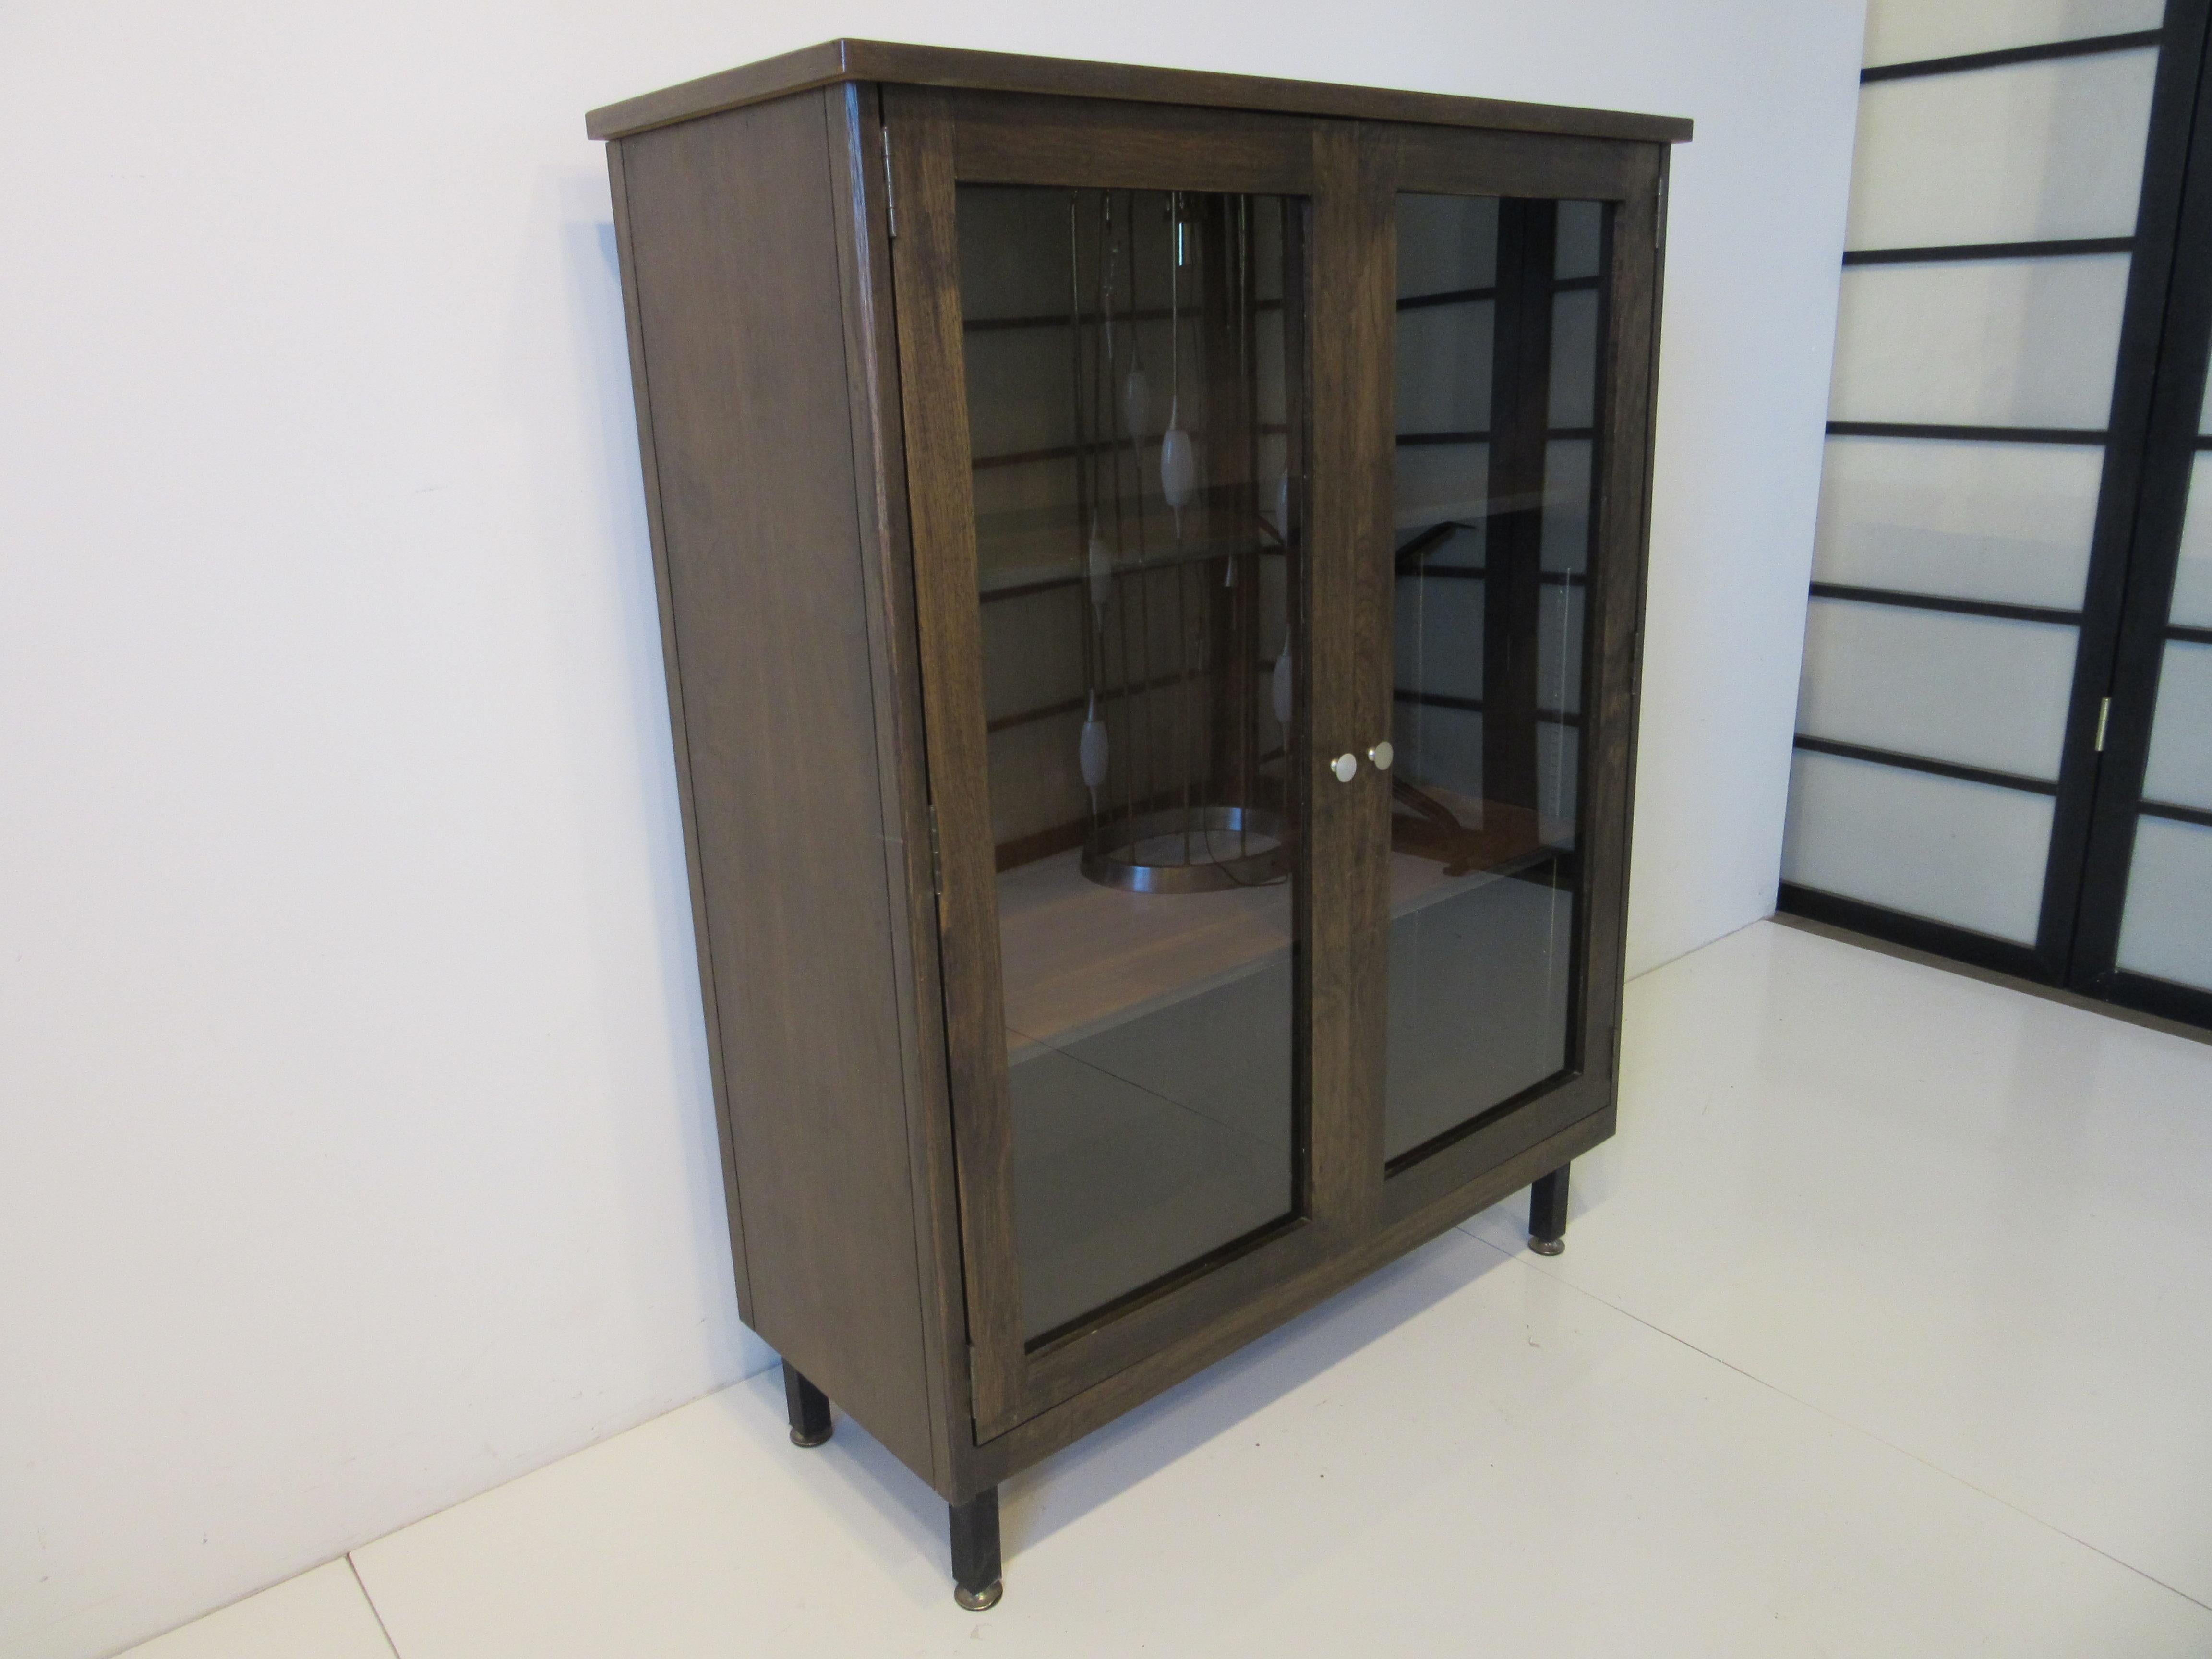 A grained wooden bookcase with one fixed shelve and one adjustable shelve sitting on very sturdy satin black squared tubed legs with adjustable foot pads . The pulls on the double doors are in brushed aluminum so it has that Mid Century vibe but